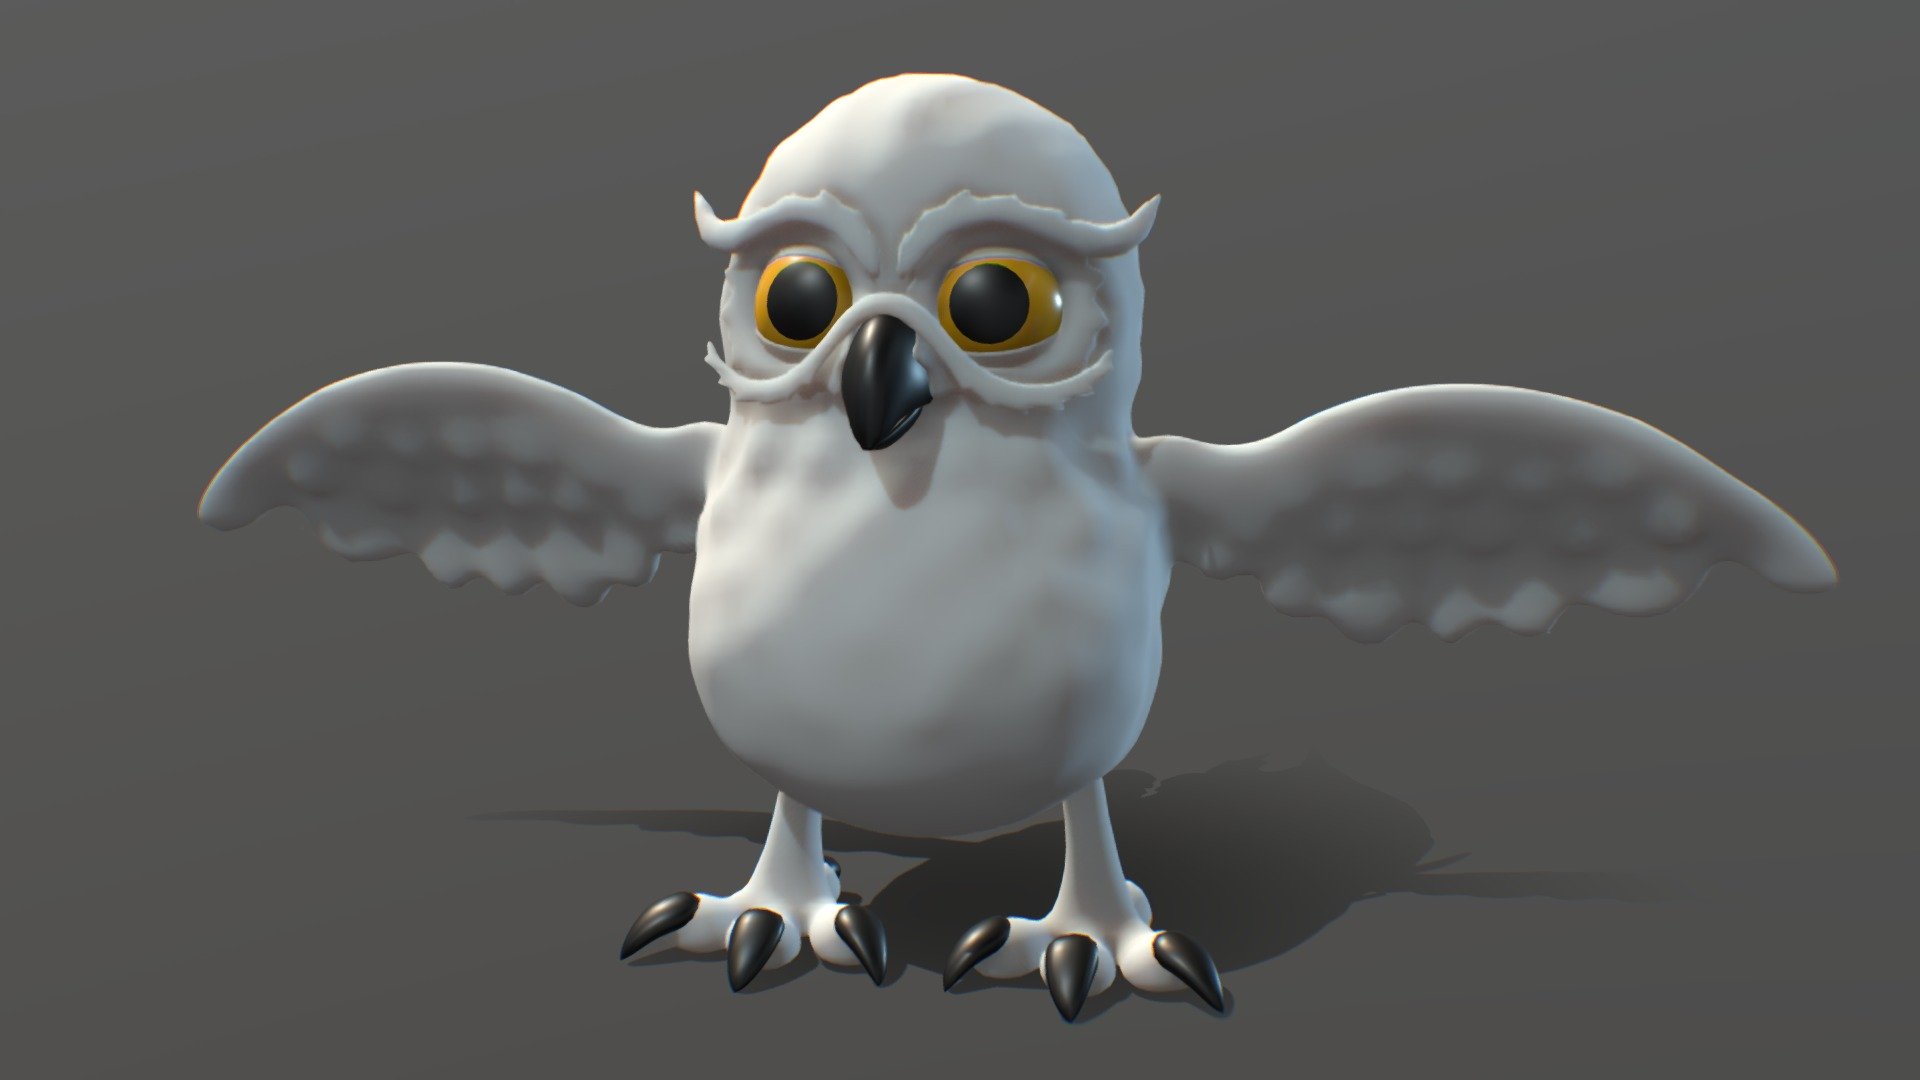 Cartoon Snowy Owl is a high quality model to add more details and realism to your rendering projects. Fully detailed Detailed enough for close-up renders 3d model